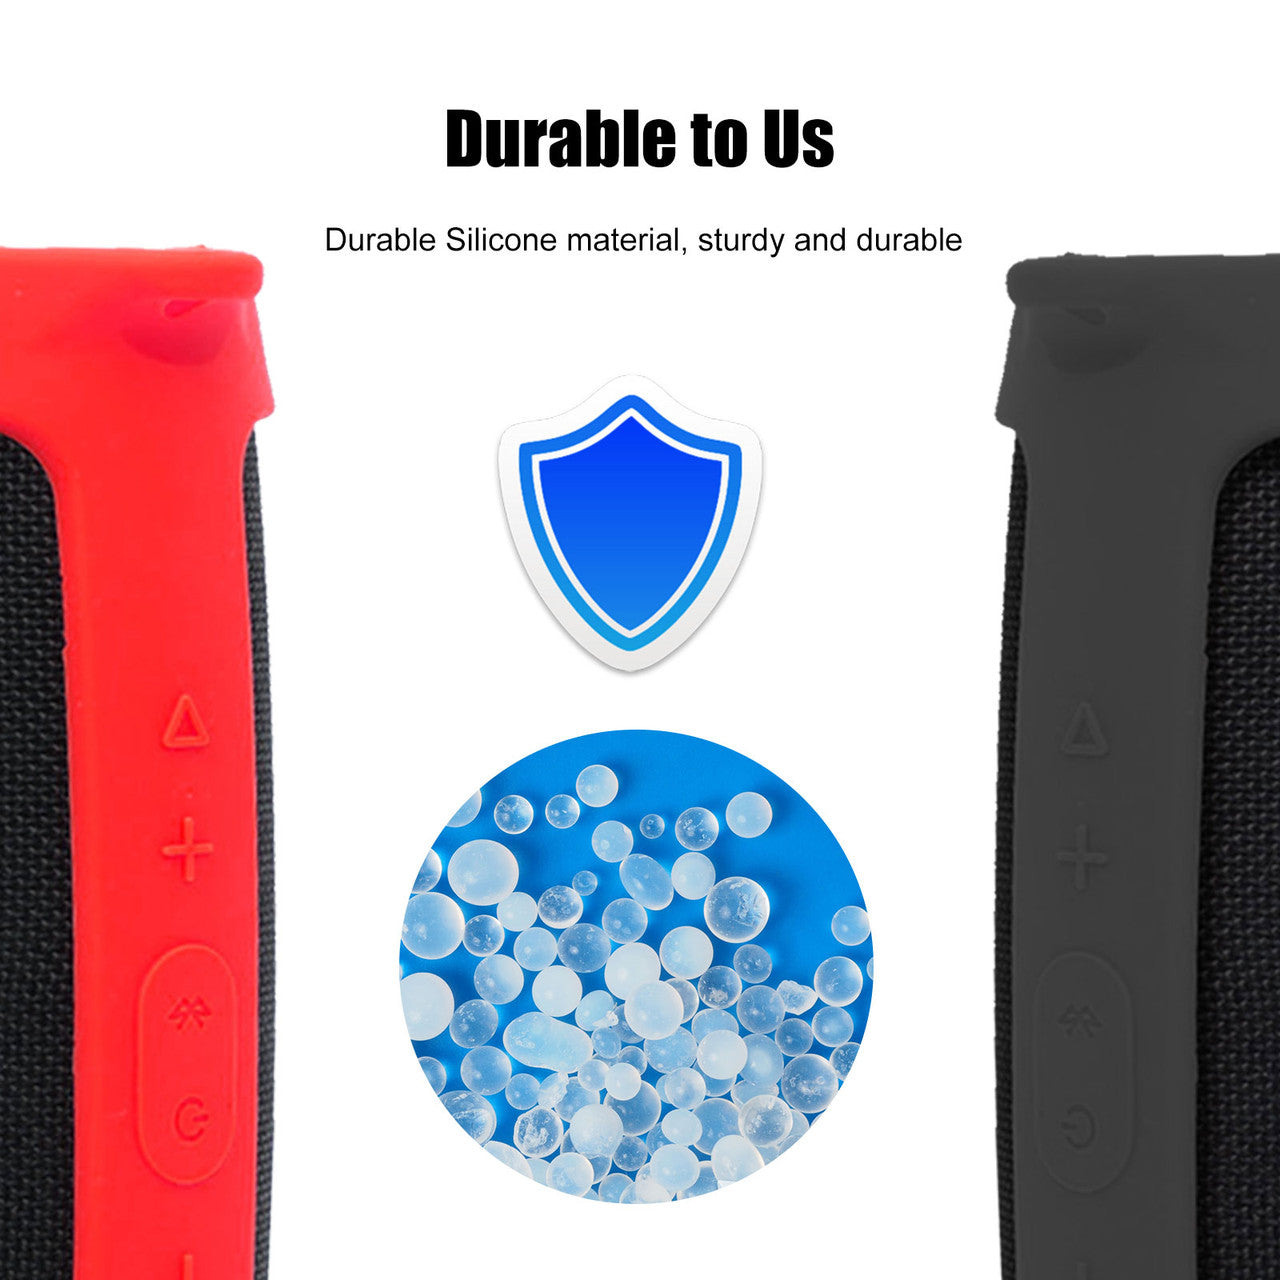 Durable Protective Case Silicone Carrying Case Cover Compatible for JBL Charge 4 Wireless Bluetooth Speaker, Black